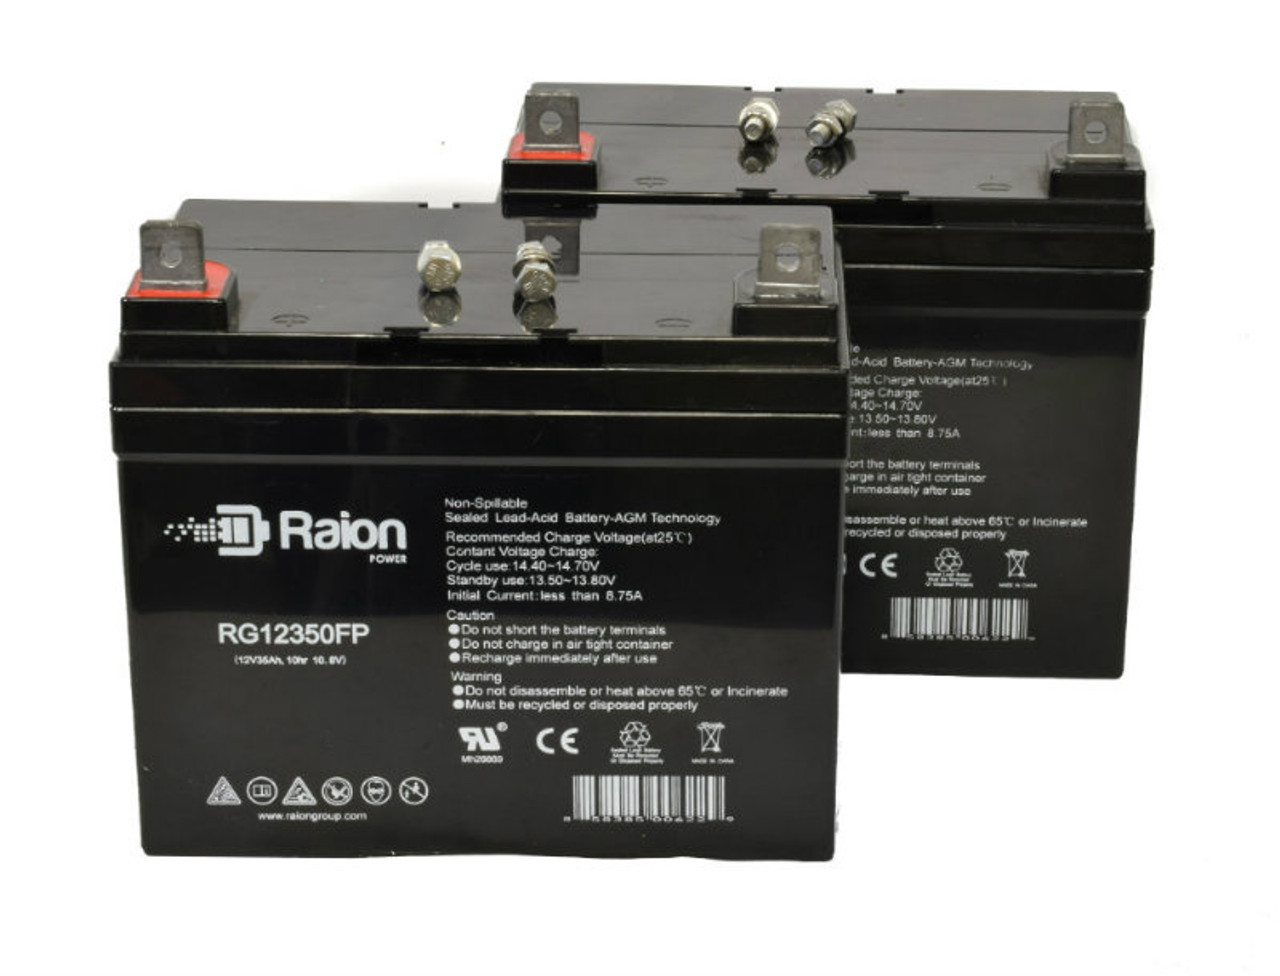 Raion Power Replacement 12V 35Ah Lawn Mower Battery for Ingersol Equipment 648 - 2 Pack